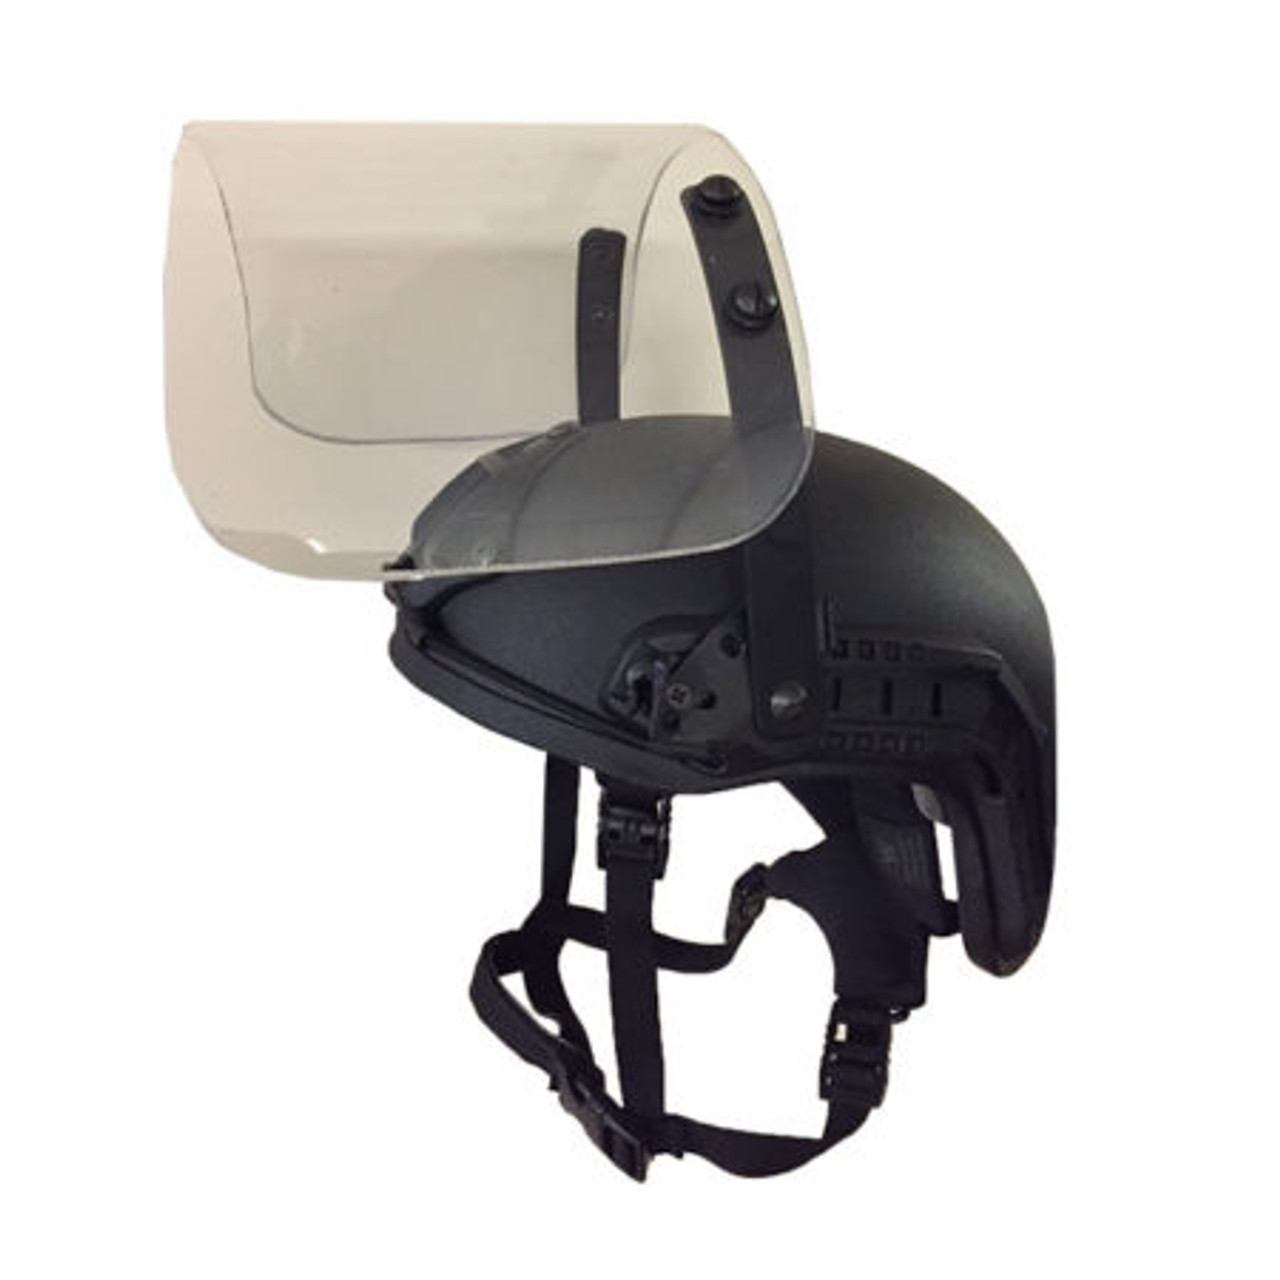 United Shield Riot Face Shield with Rail Adapter, Protection from impact, splash, and fragments. Used on helmets with rails 6"